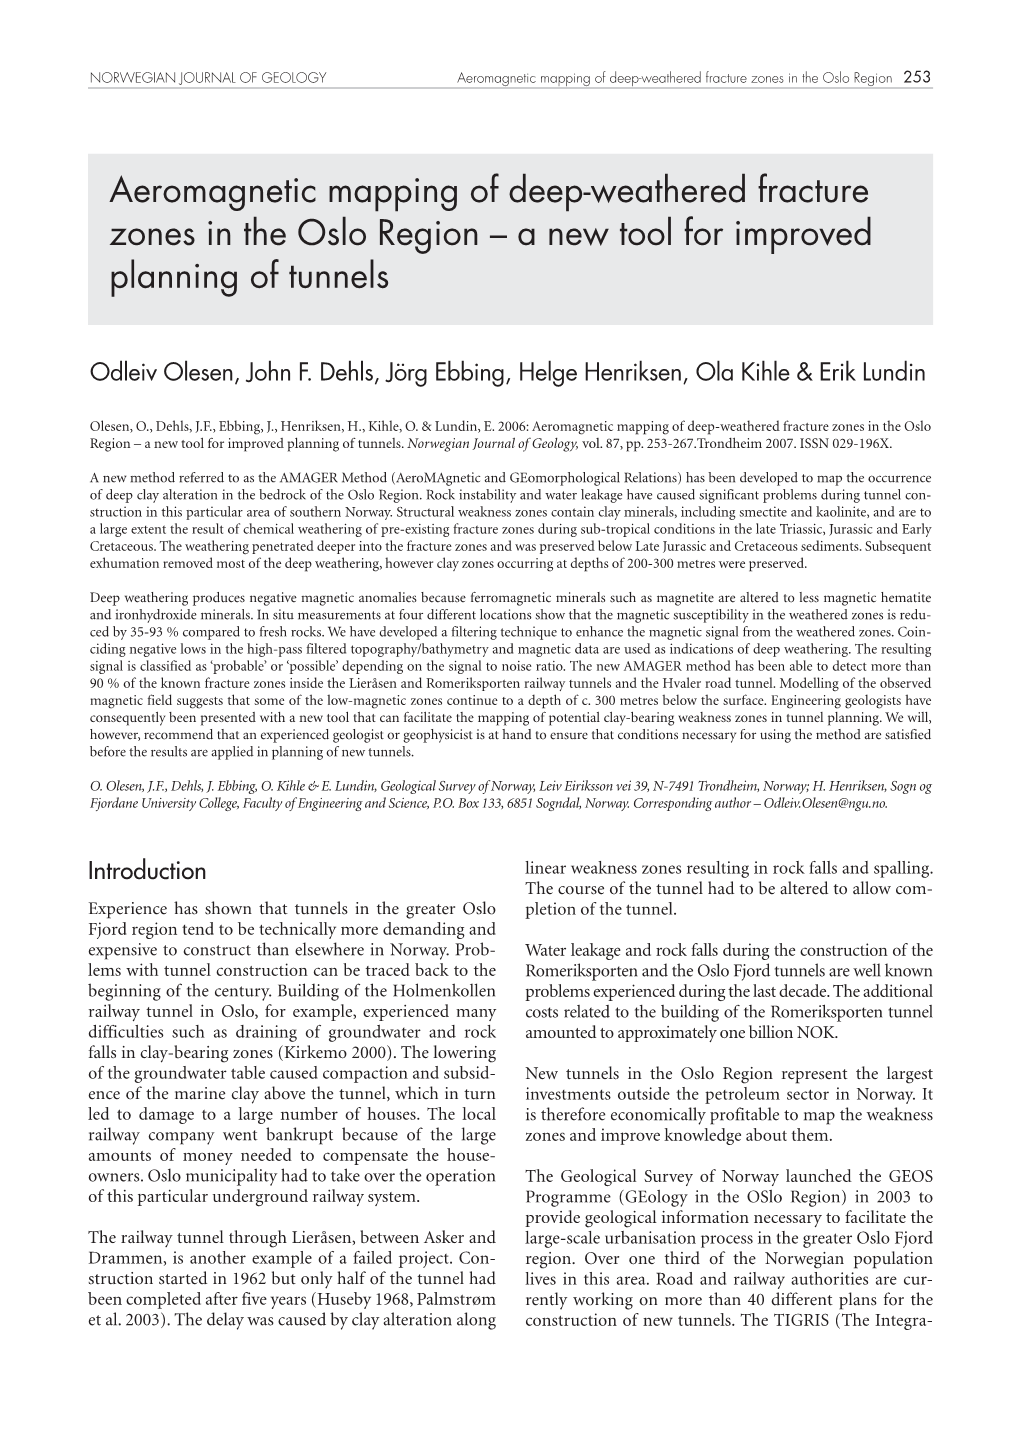 Aeromagnetic Mapping of Deep-Weathered Fracture Zones in the Oslo Region 253